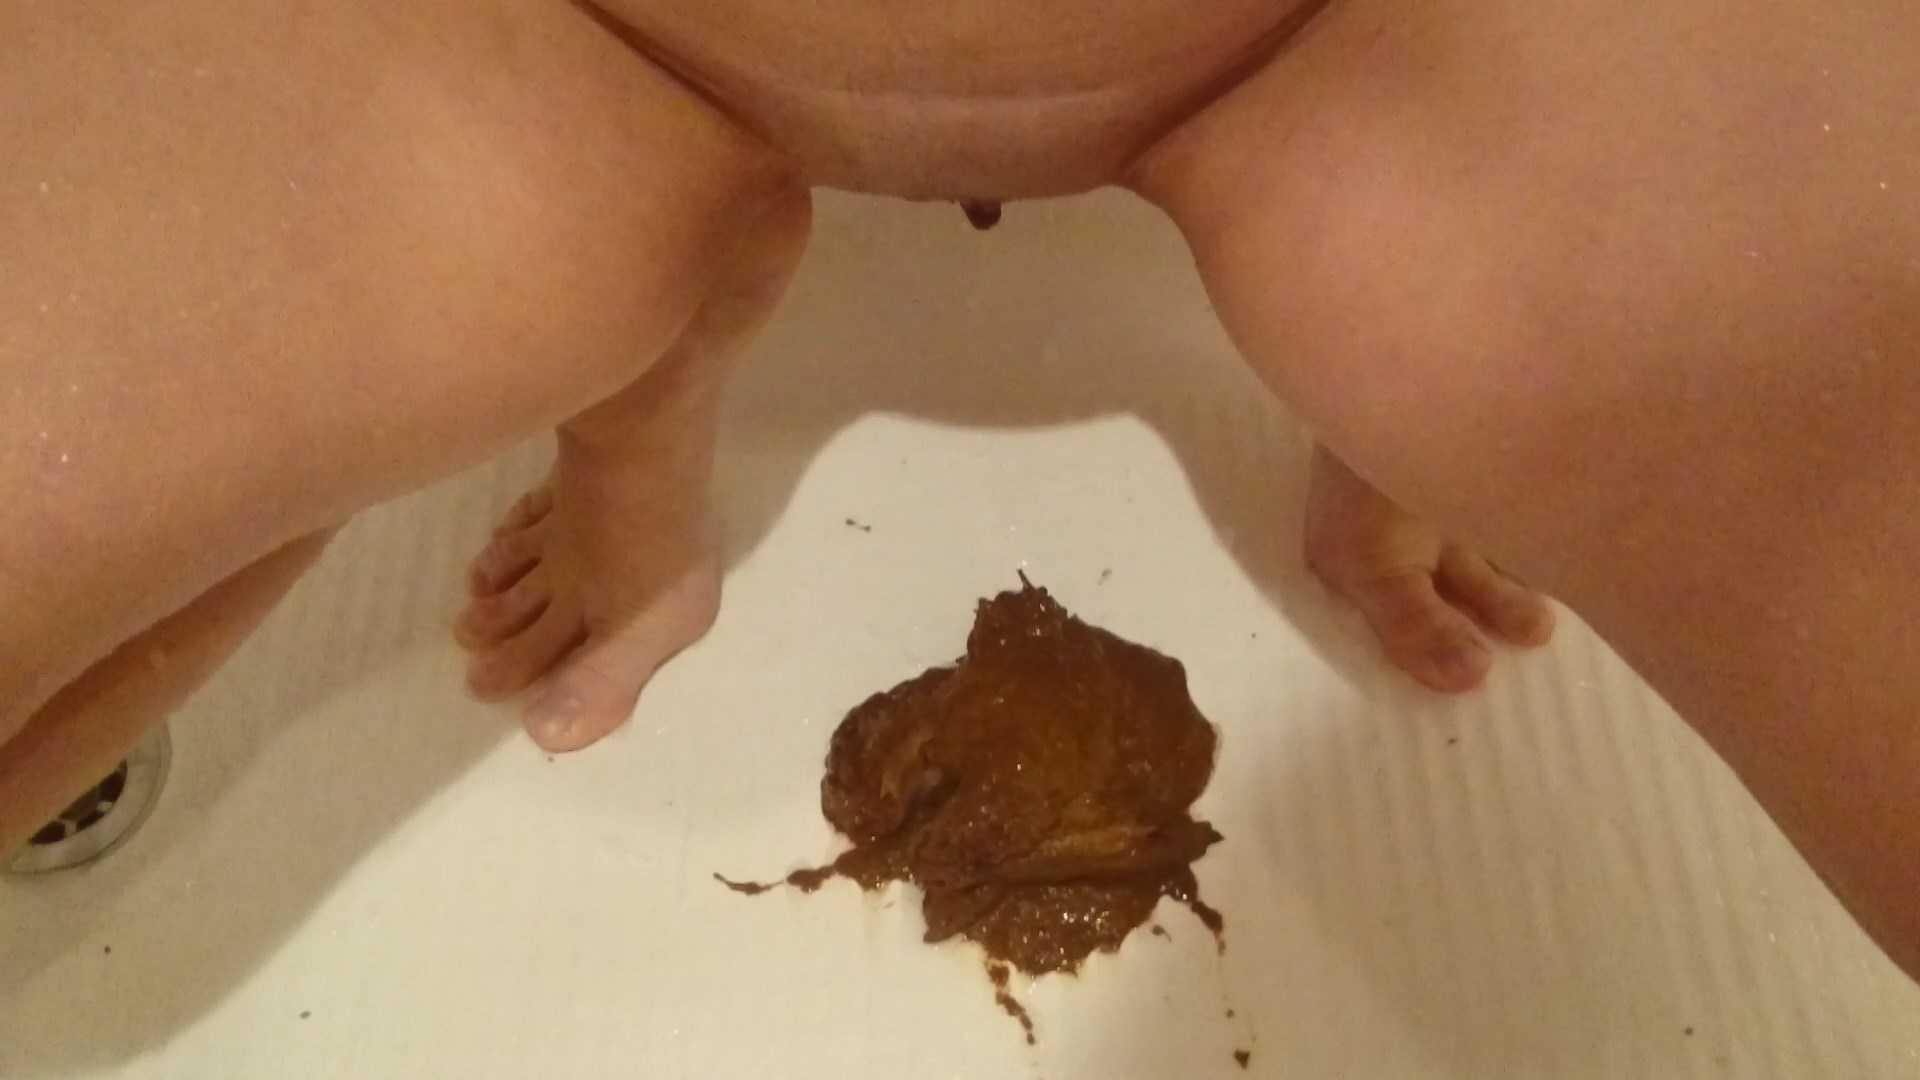 Sexy body is all covered with shit – Brown wife | Full HD 1080p | November 14, 2017